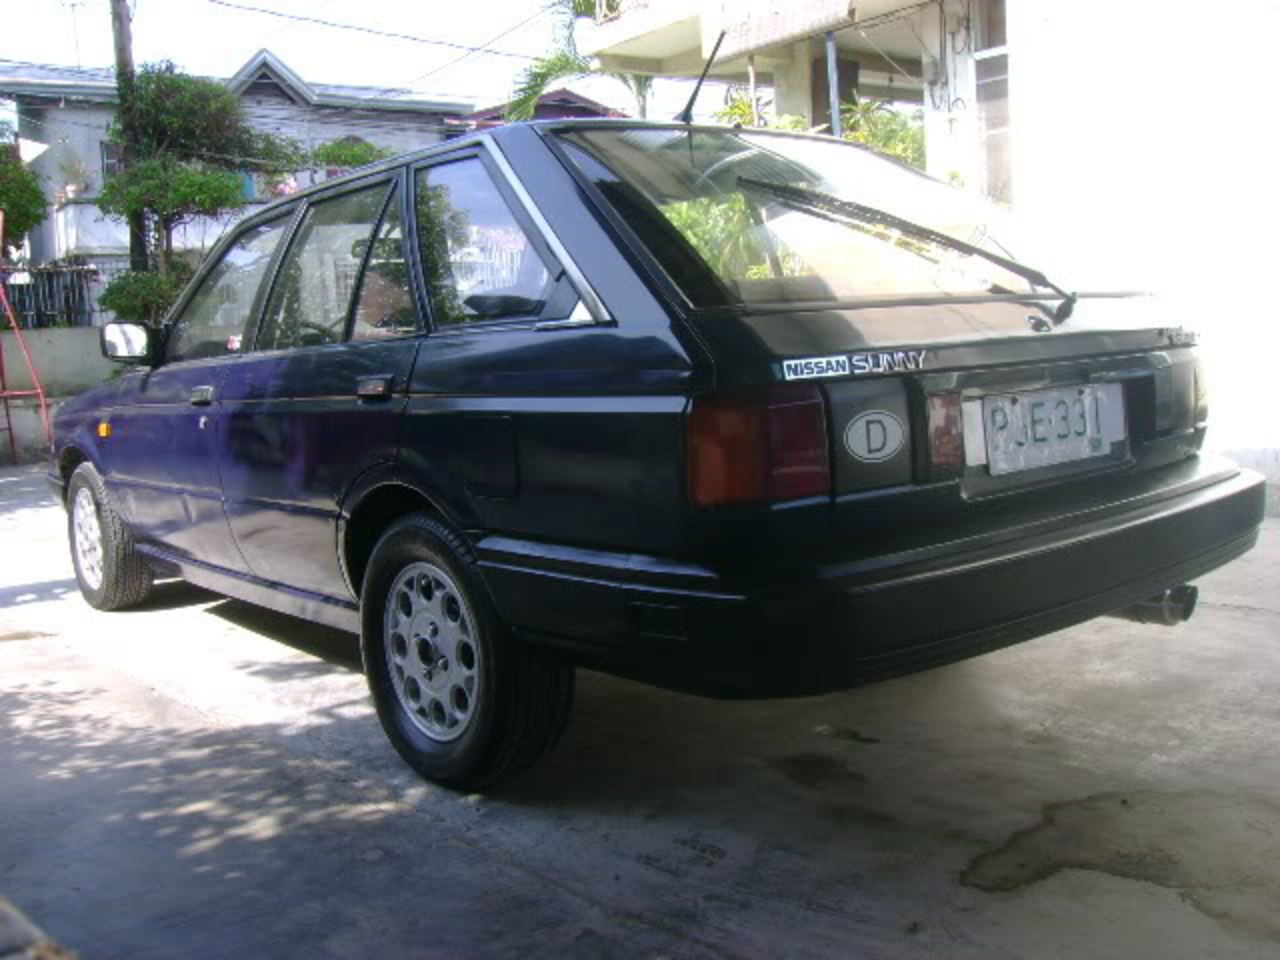 Nissan Sunny 13 SG Wagon. View Download Wallpaper. 640x480. Comments